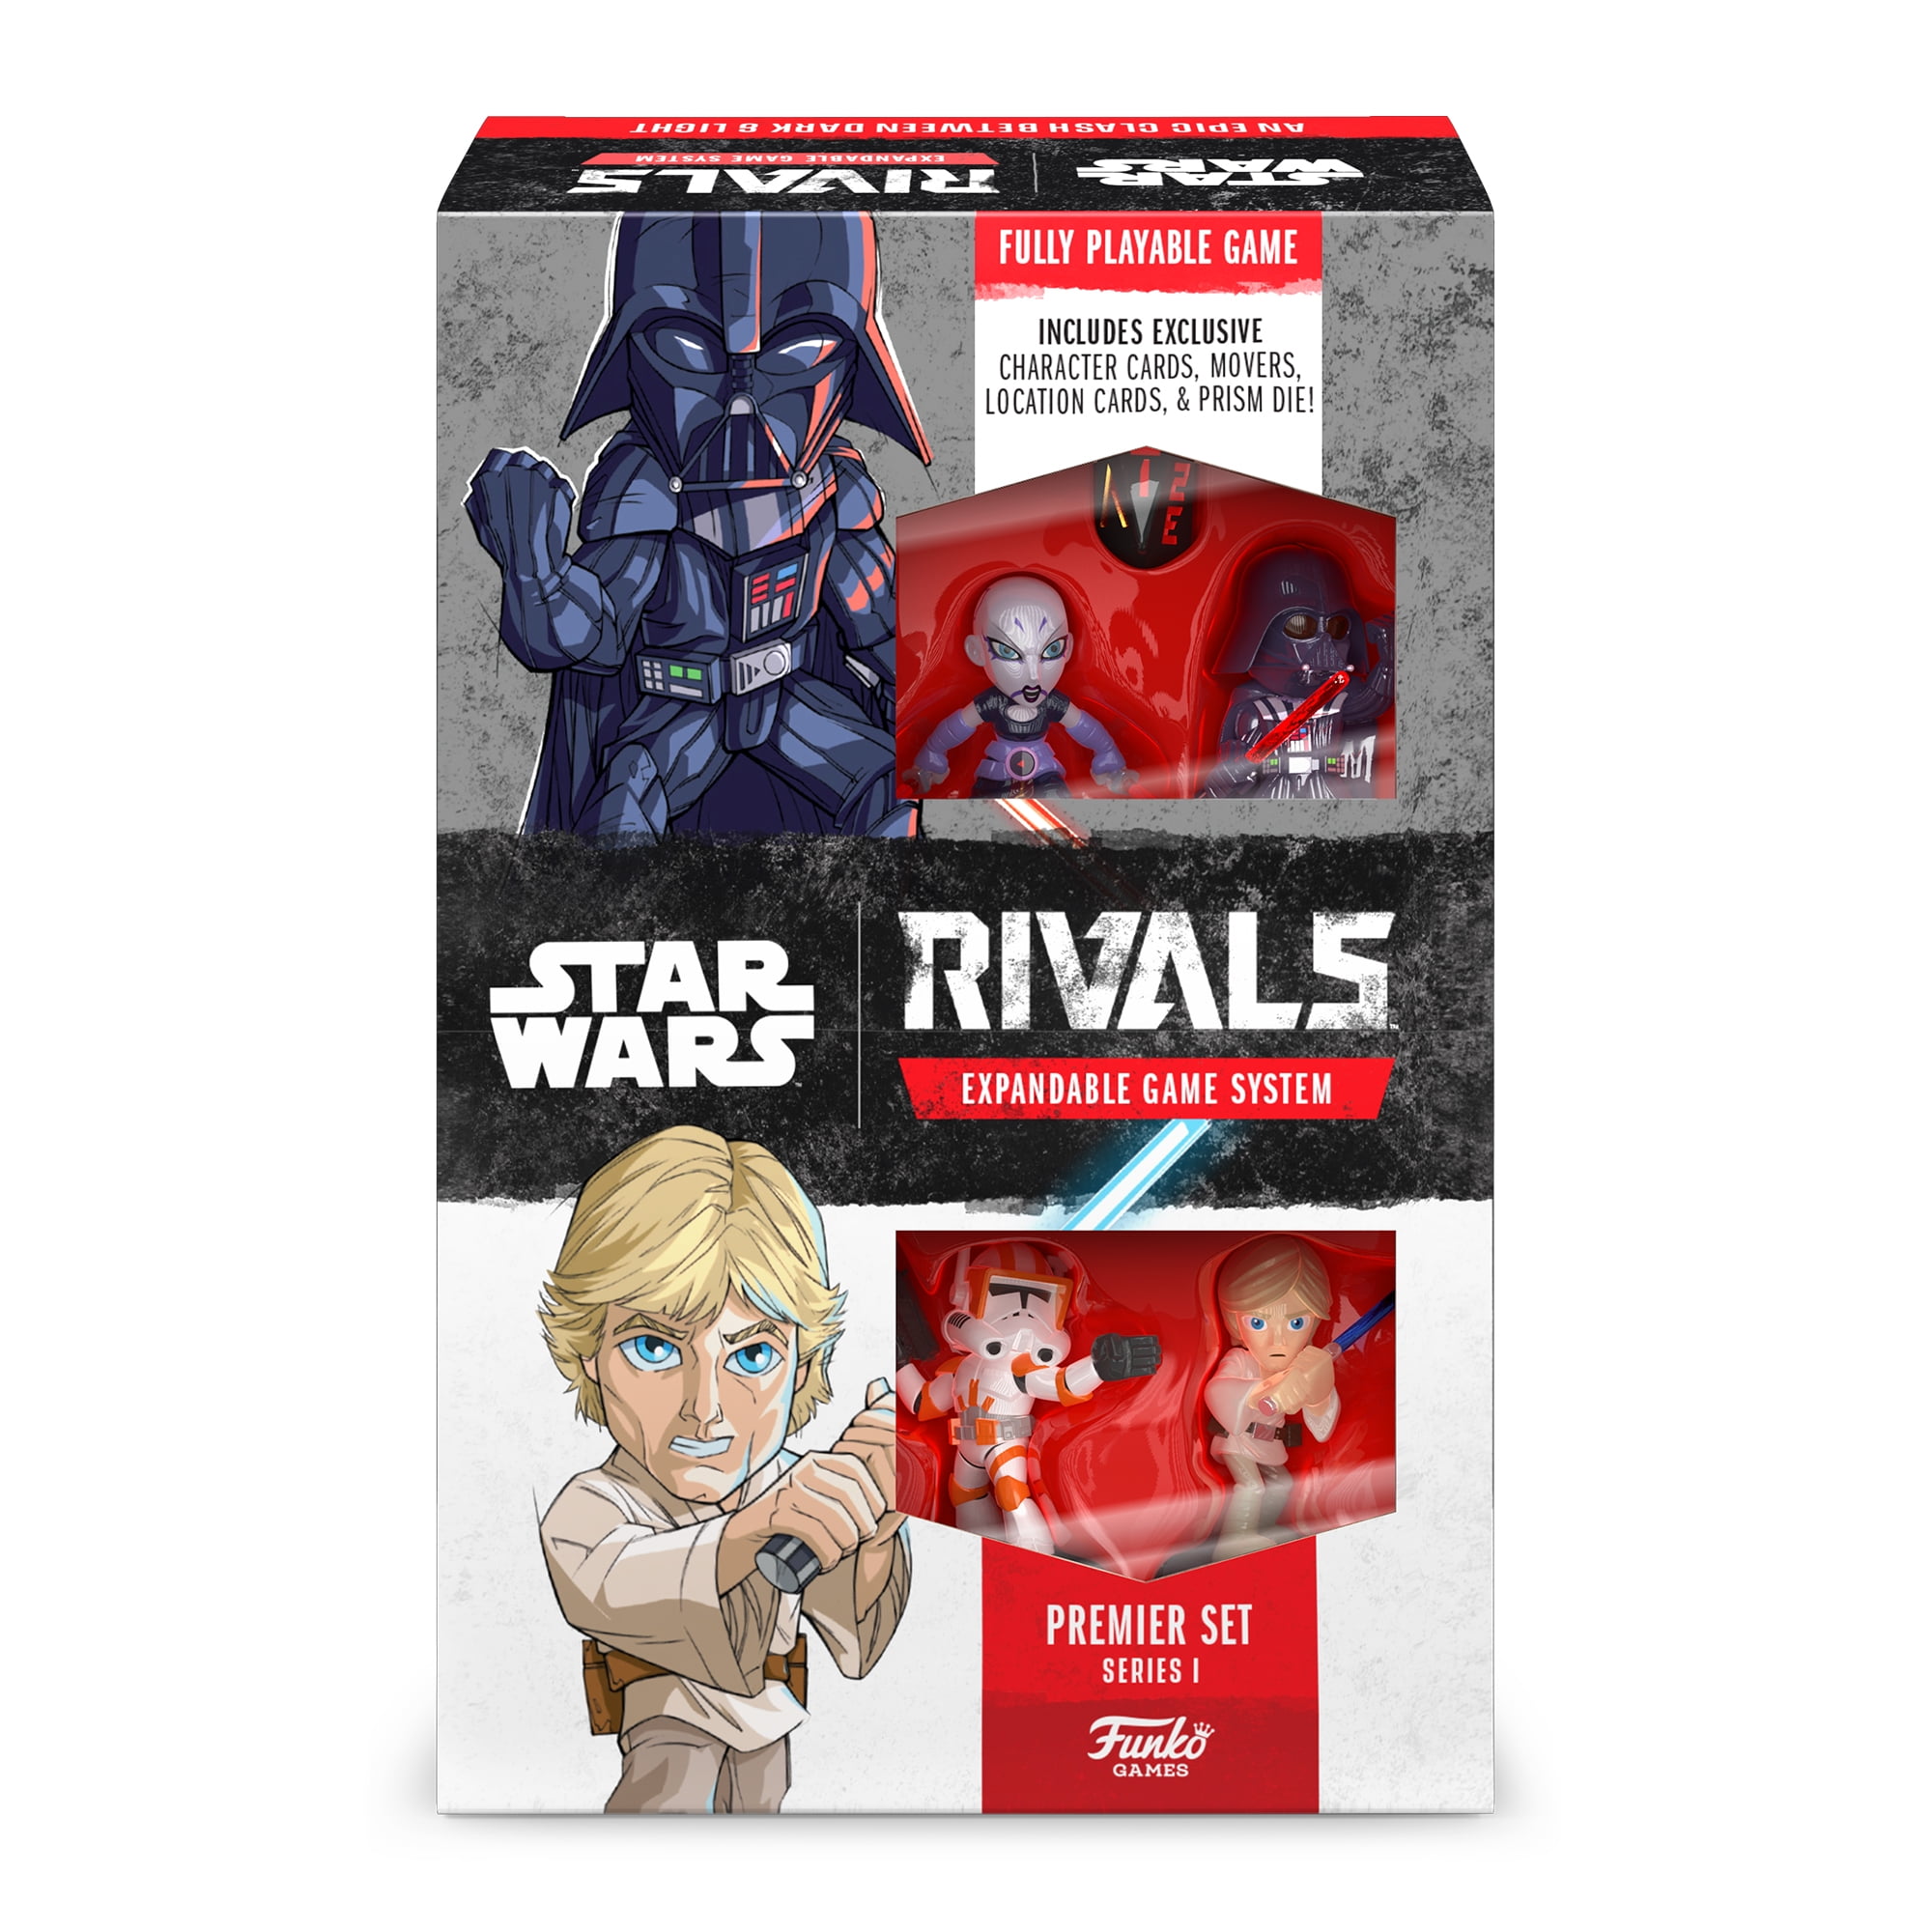 Funko Star Wars Rivals Expandable Card Game, Premier Set Two